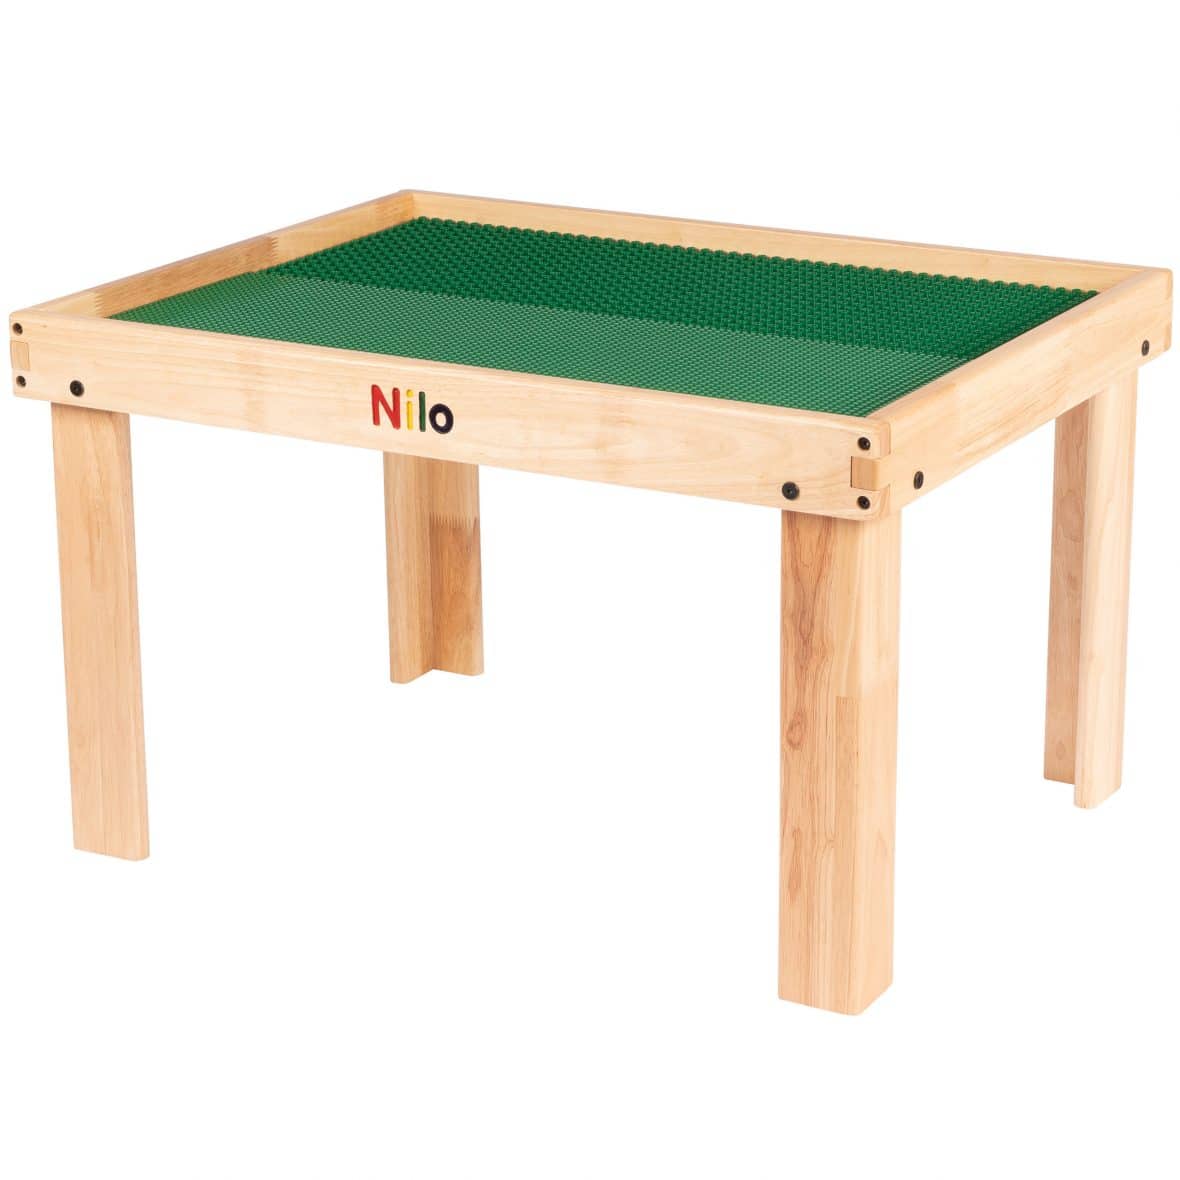 Small Lego Table for Kids, Duplo Table for Kids, Building Block Table for kids, Brick building table, green baseplates, green boards for lego duplo